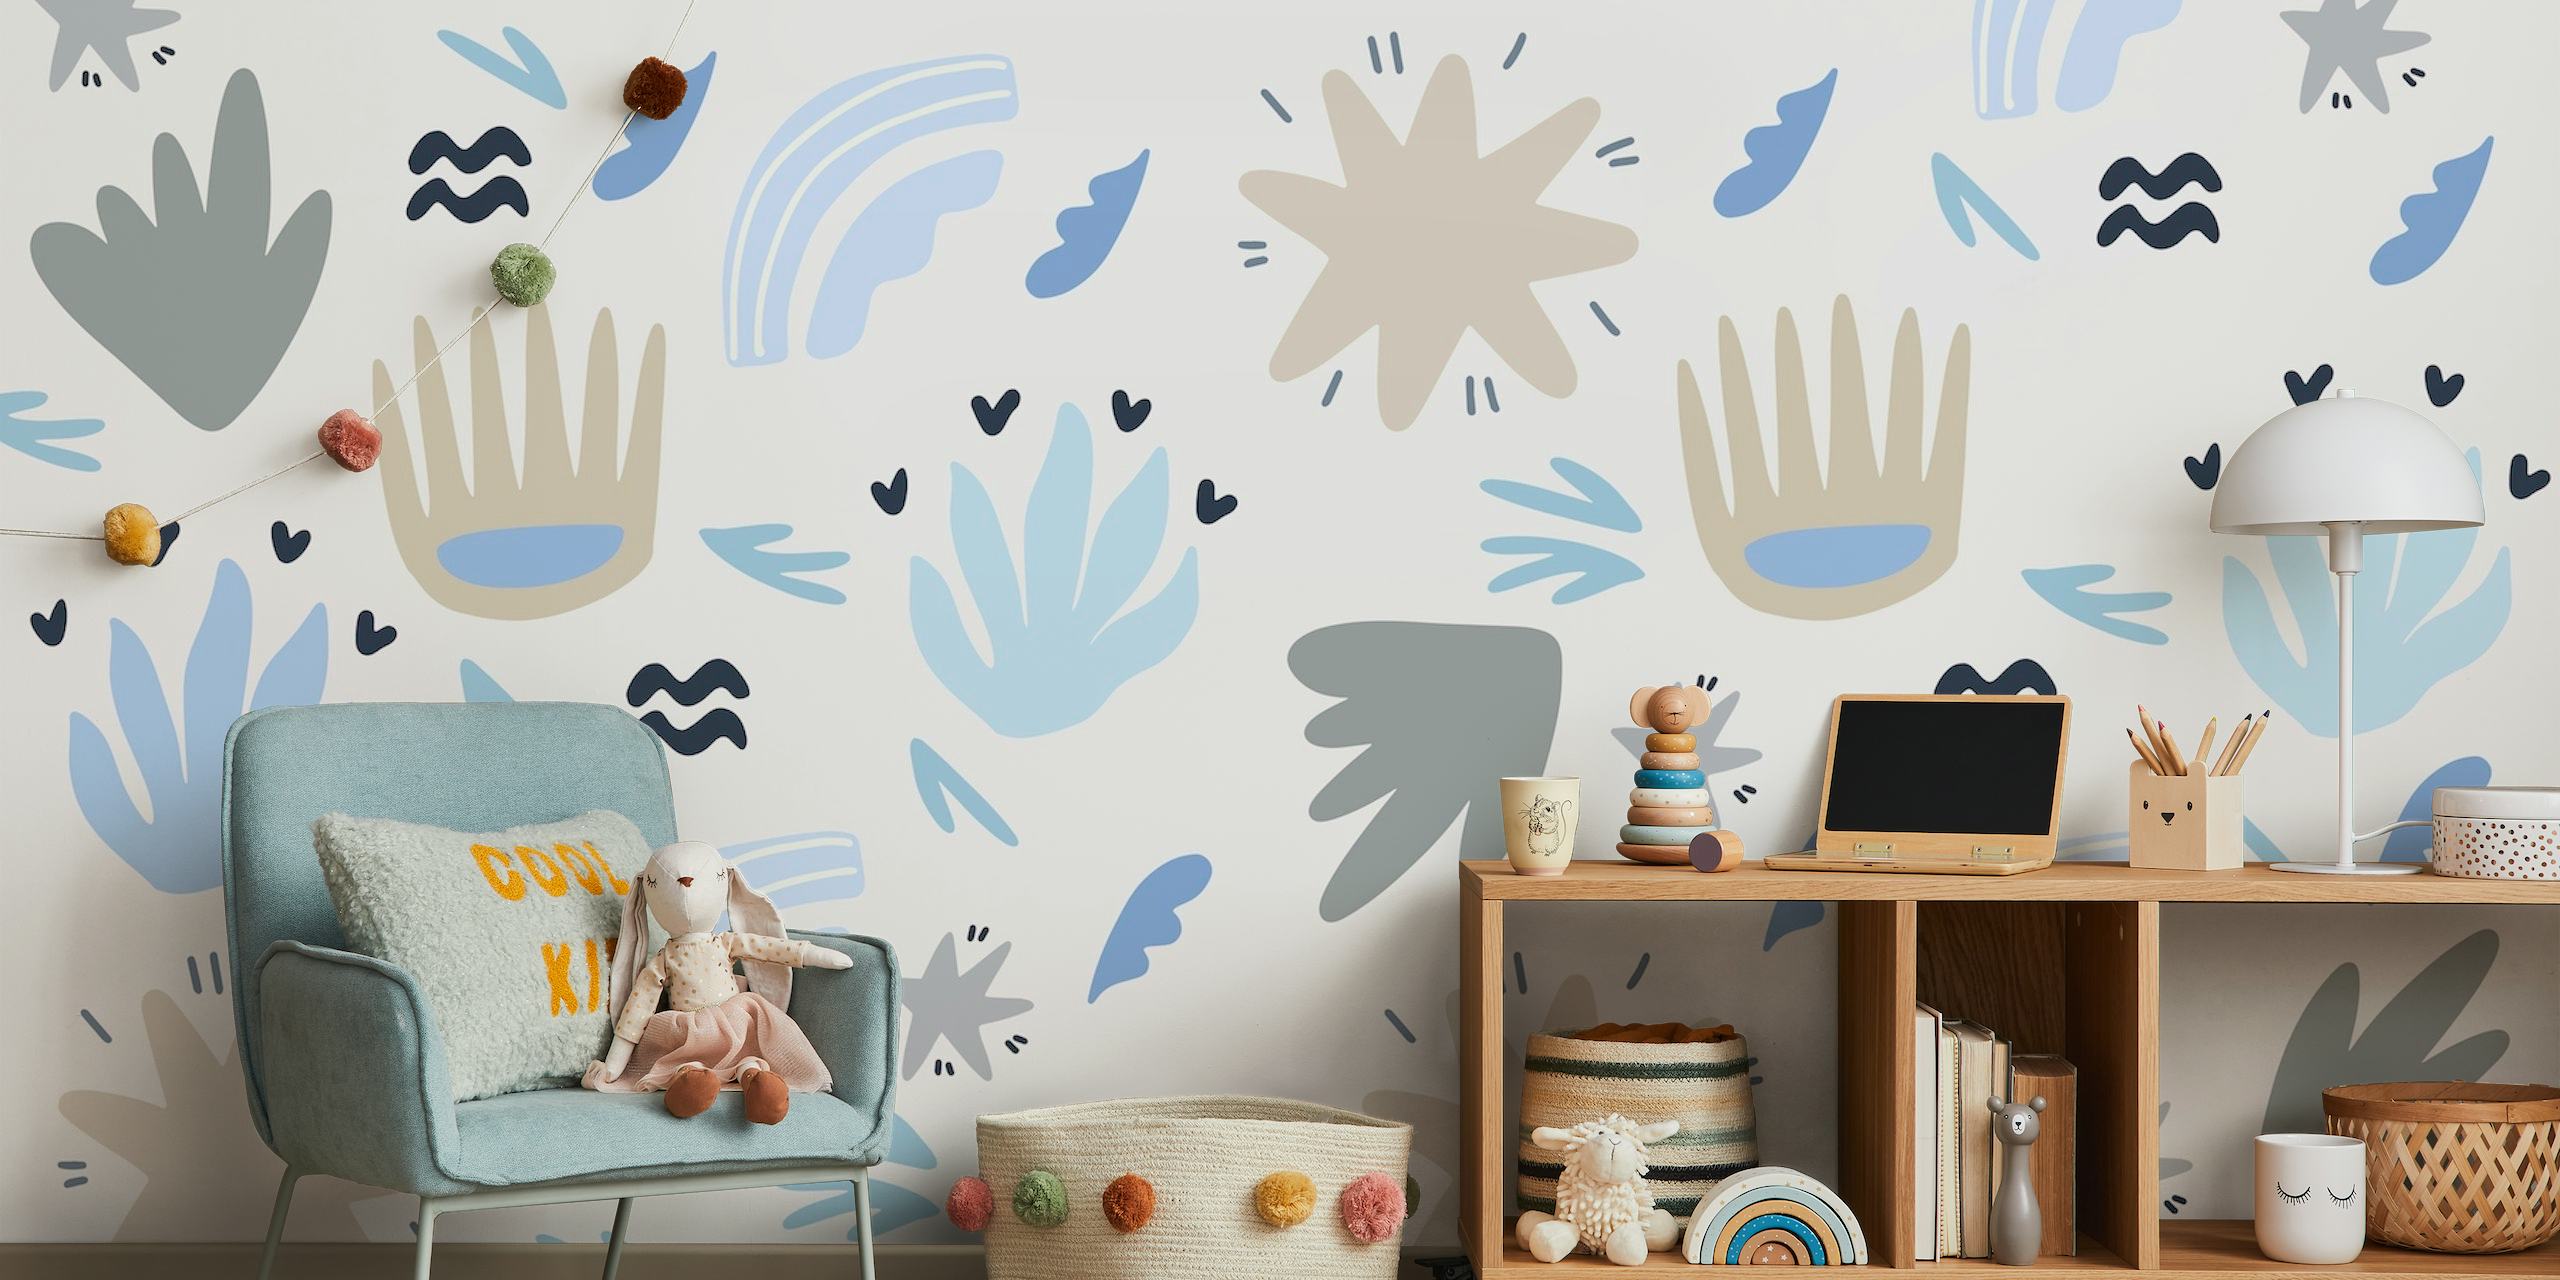 Abstract floral and shapes pattern in shades of blue, grey, and white for children's wall mural